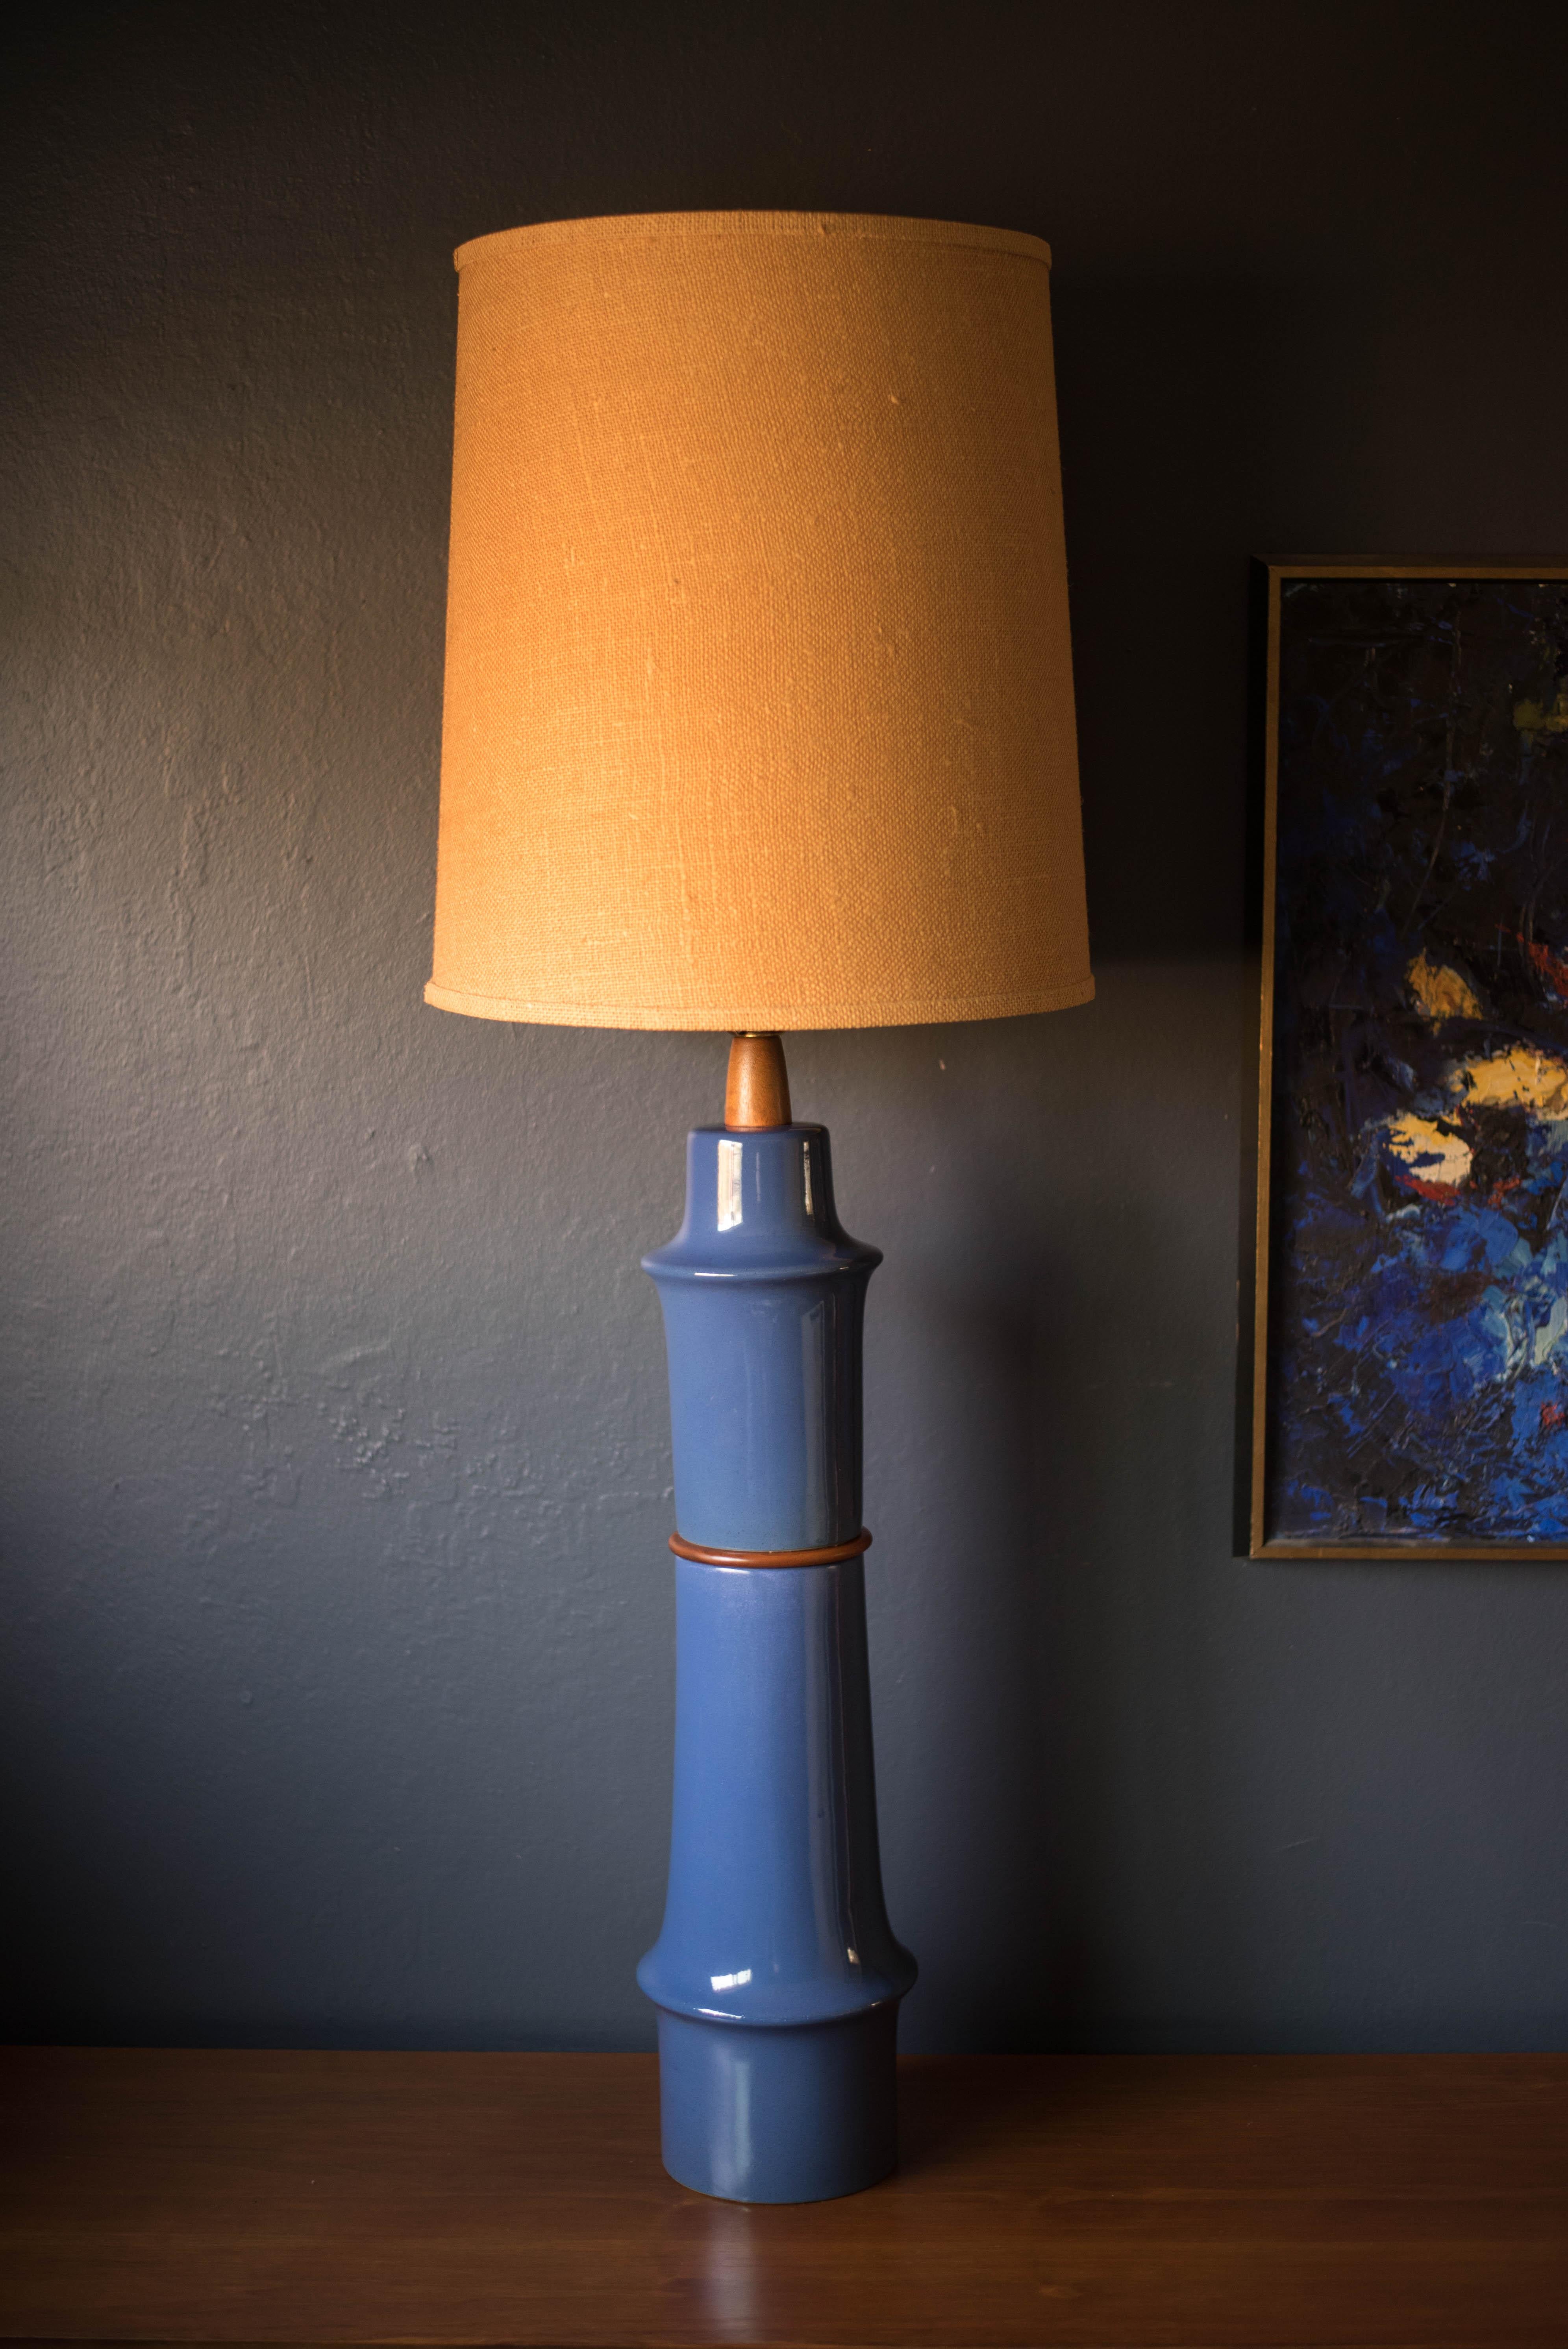 Mid-century ceramic and walnut lamp by Gordon and Jane Martz for Marshall Studios. This oversized lamp features a sculptural stacked form with a glossy deep blue glaze finish. Includes a three way switch mechanism and burlap drum shade.